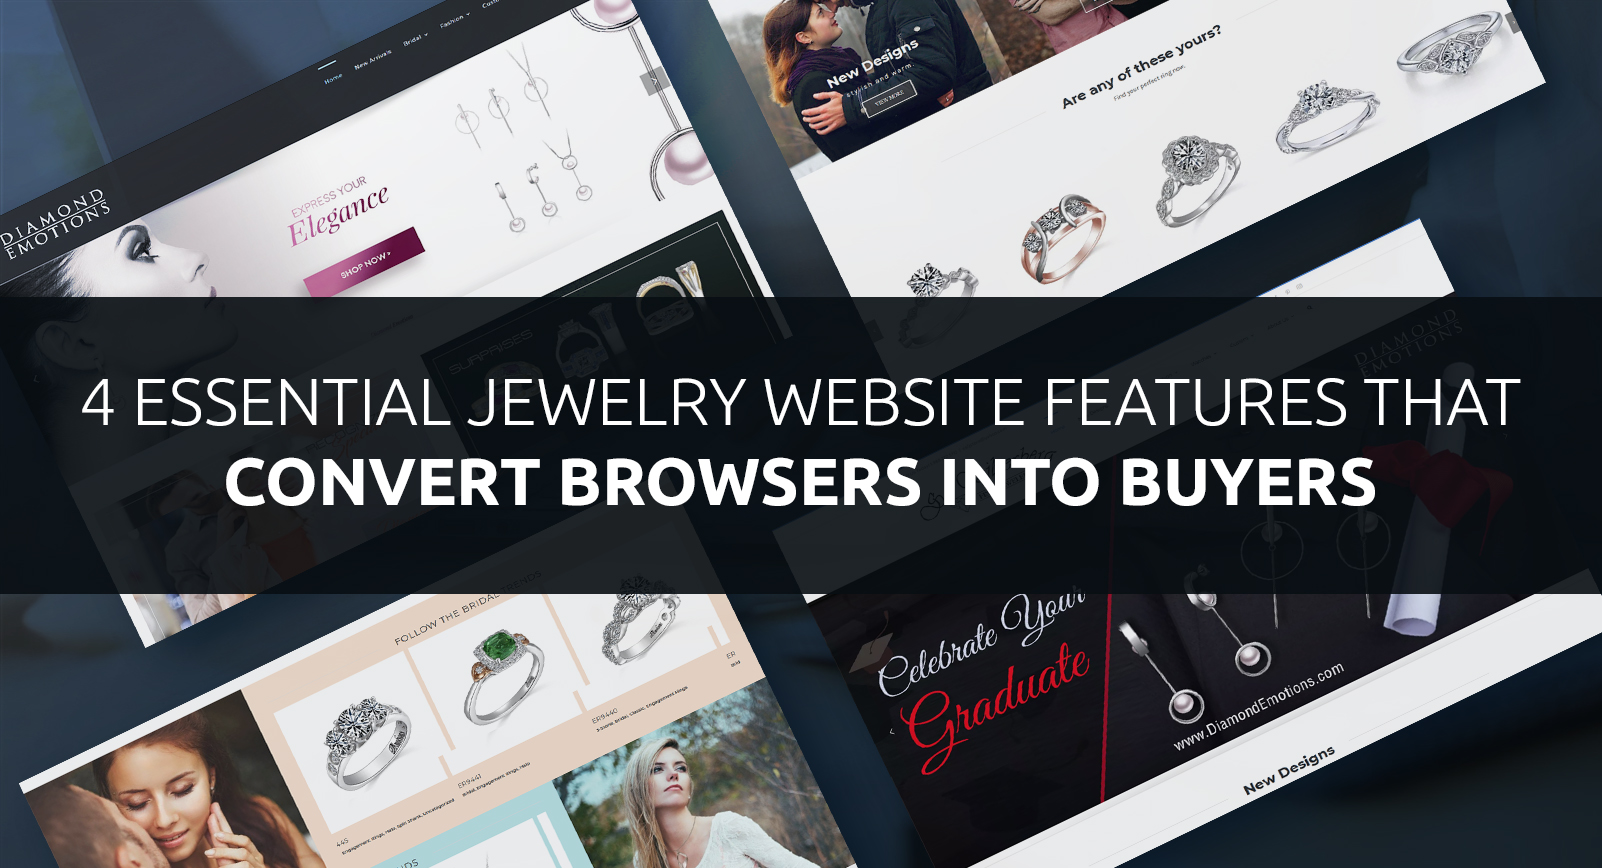 4 Essential Jewelry Website Features that Convert Browsers into Buyers